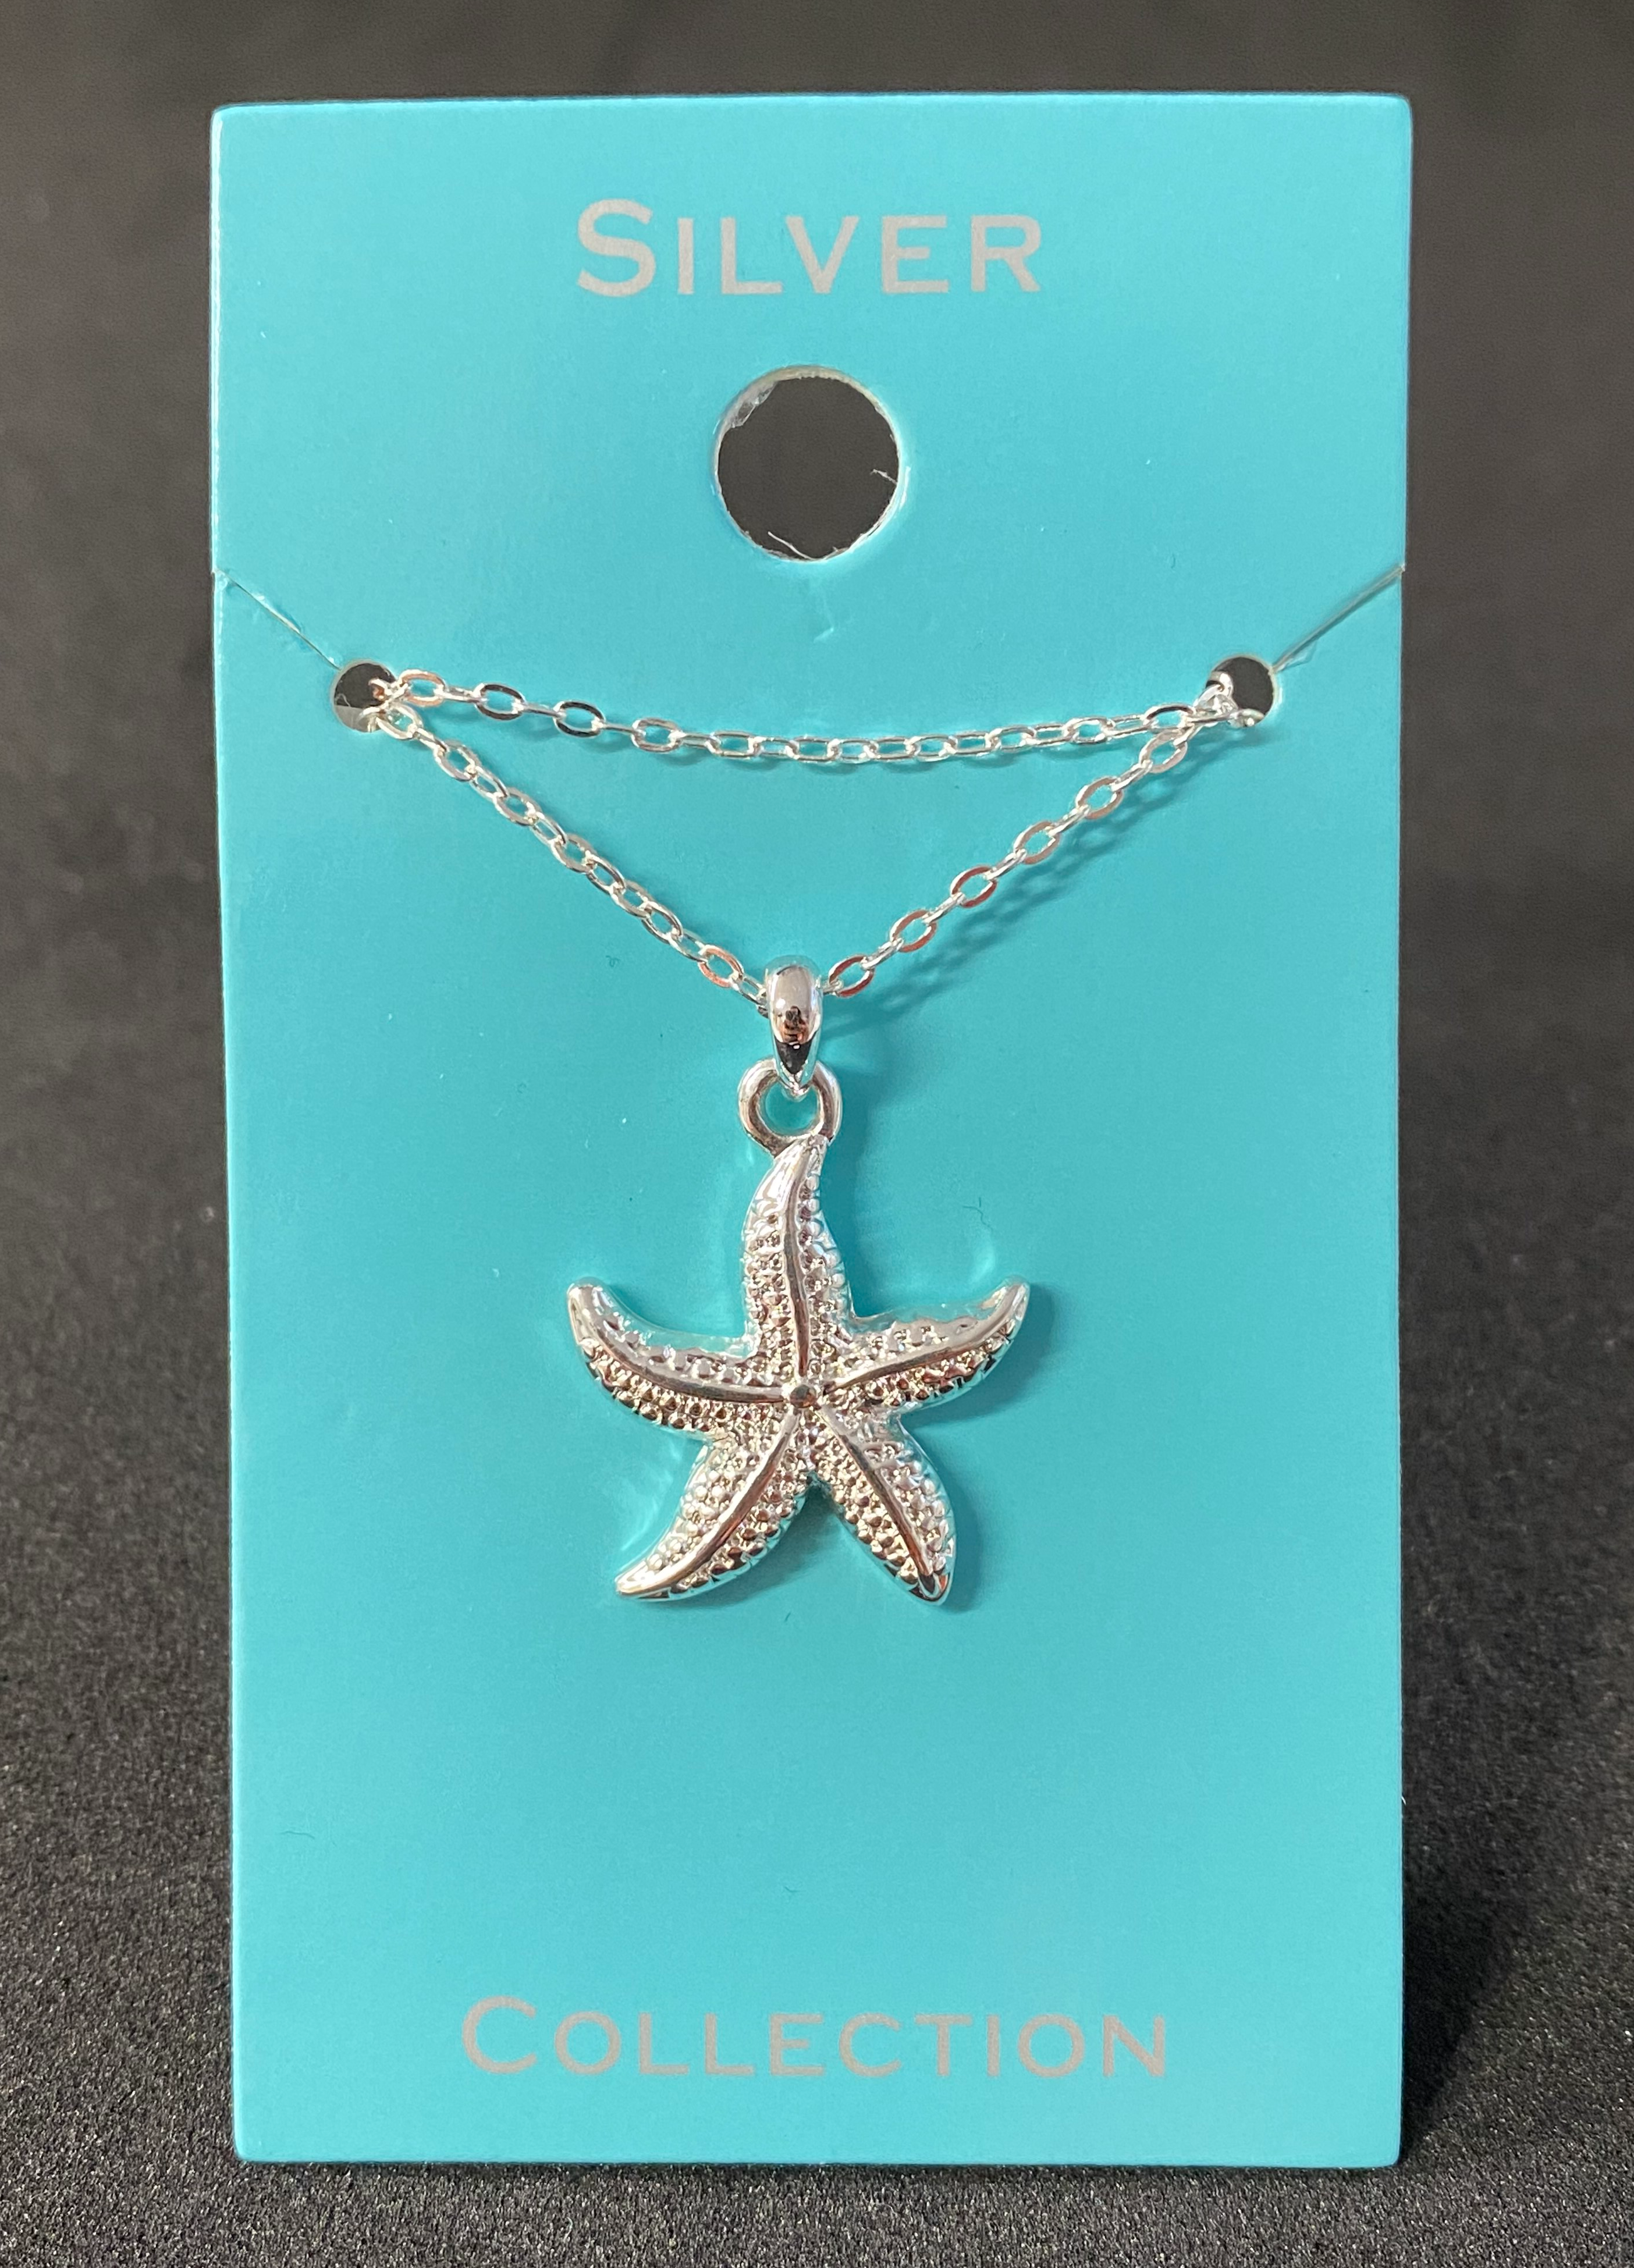 Sterling silver starfish necklace - star fish slide pendant